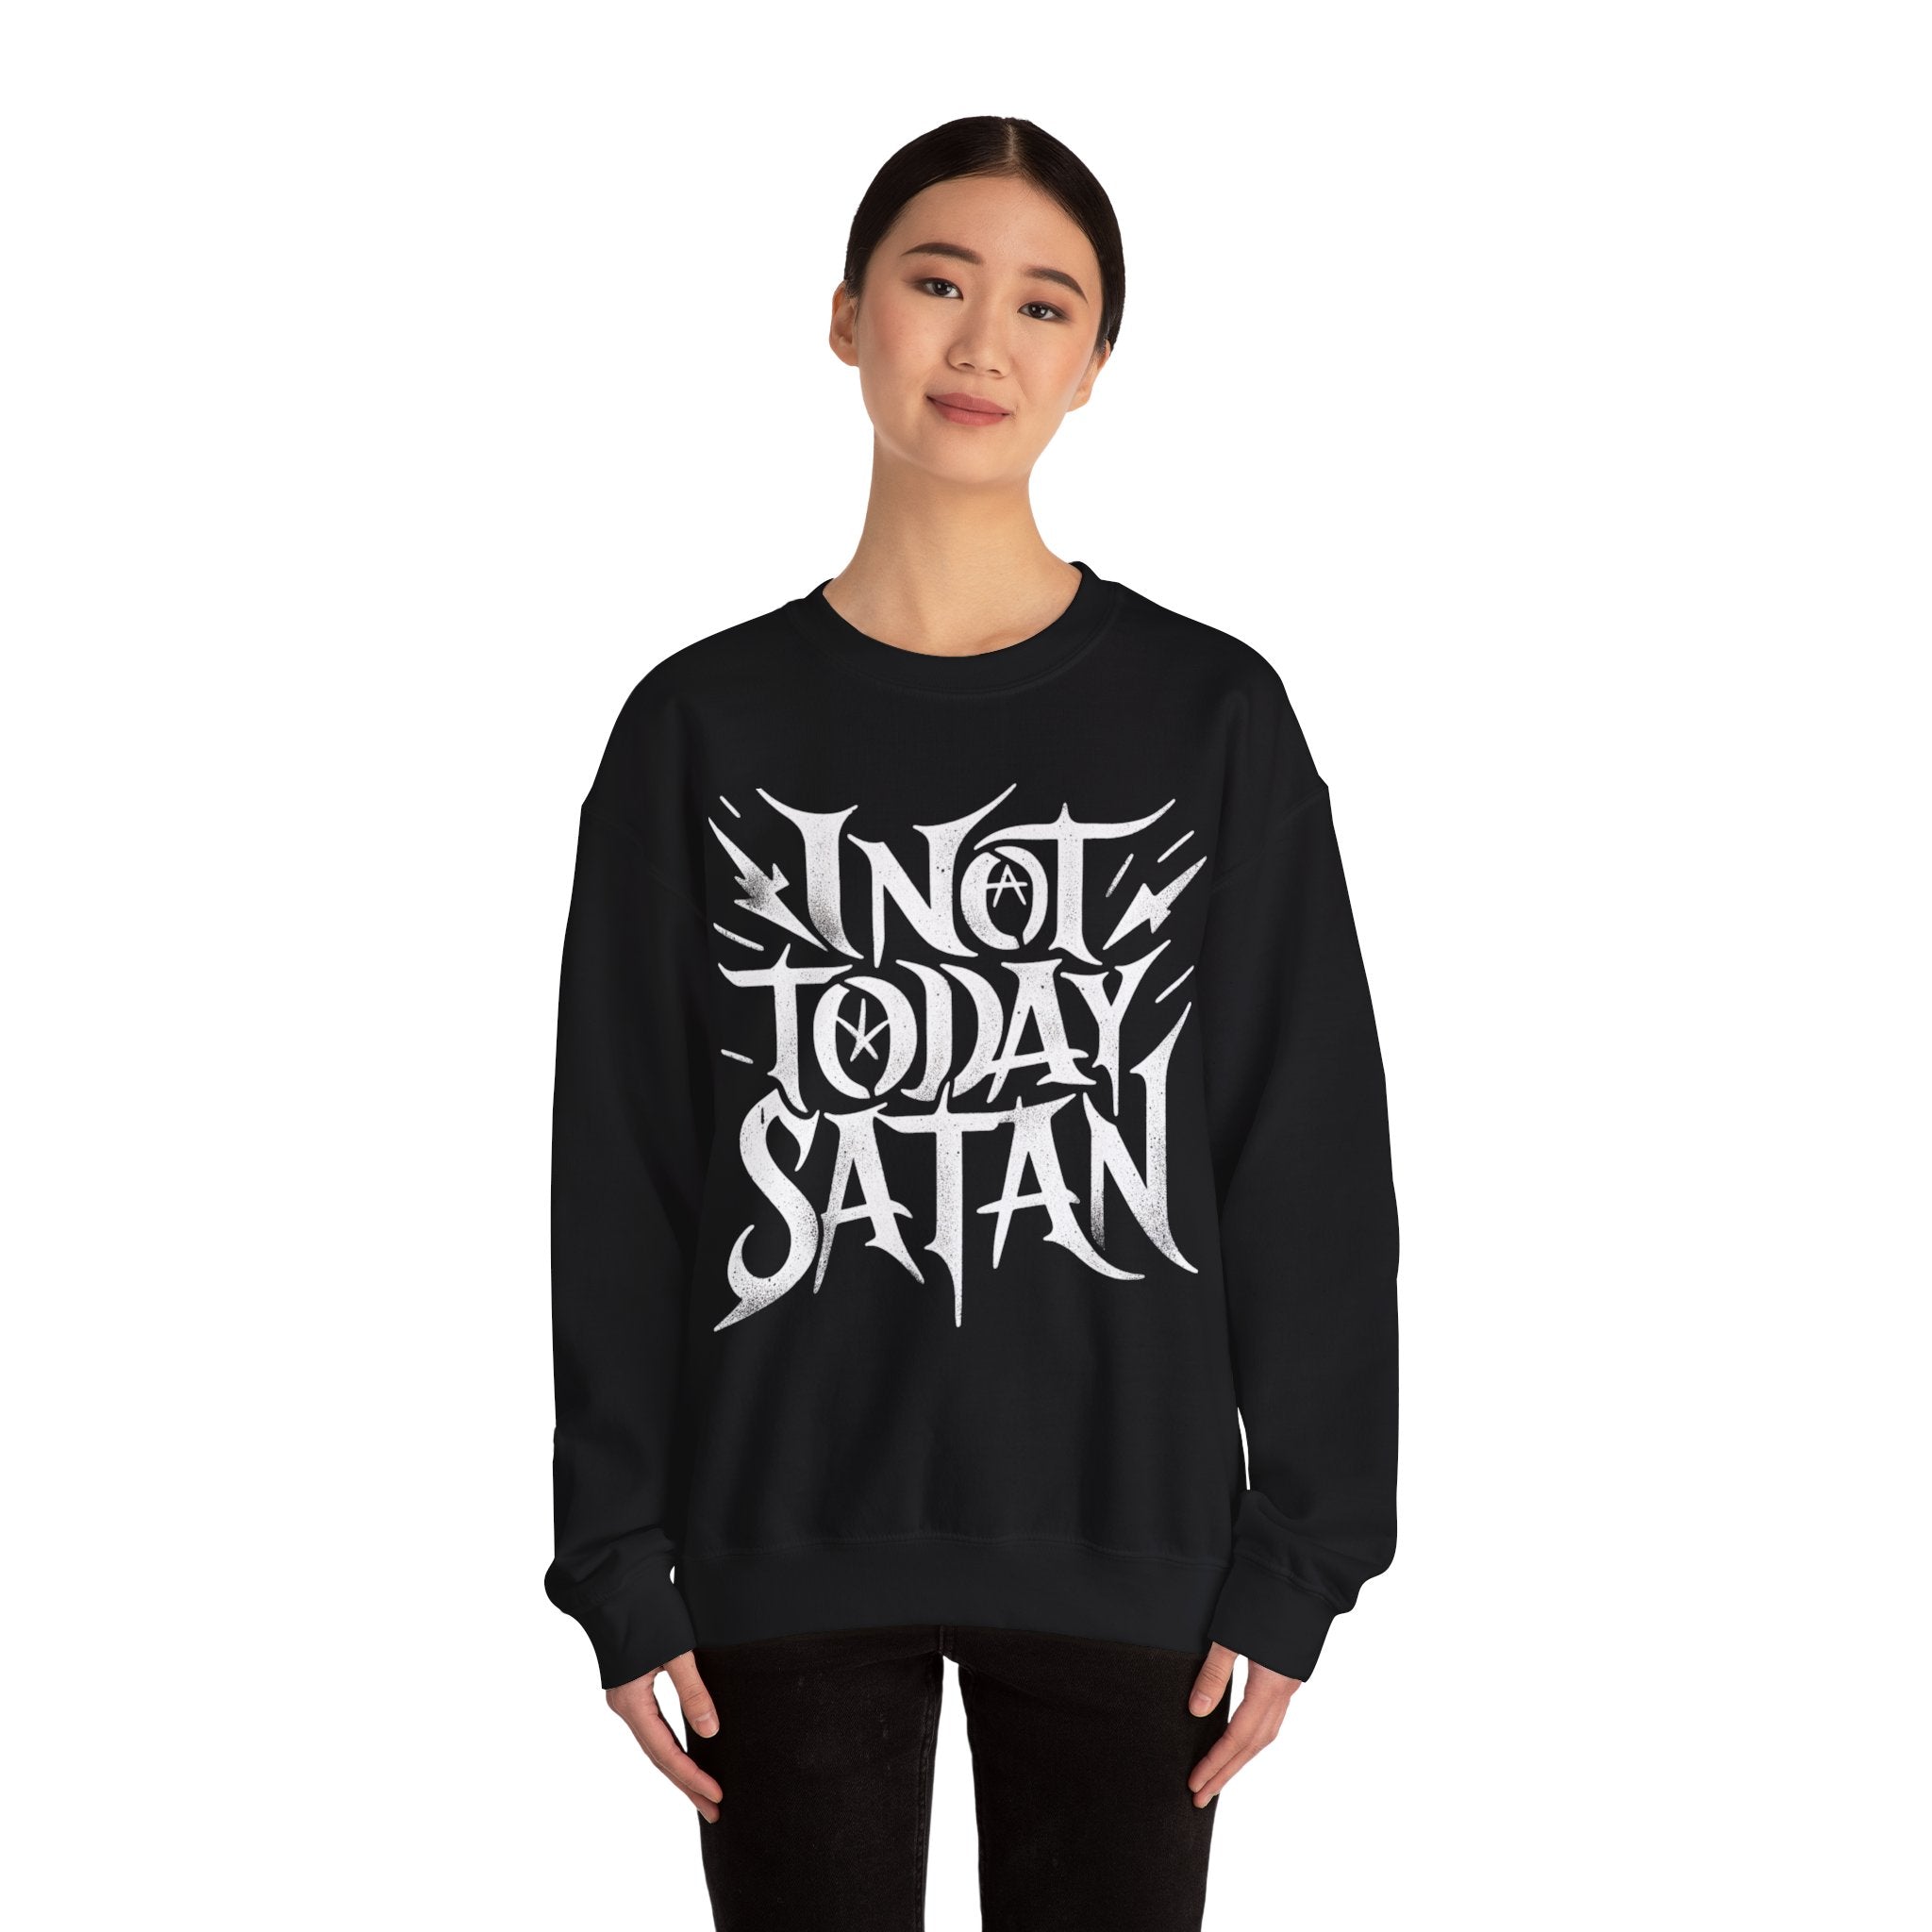 A person wearing a stylish black Not Today Satan - Sweatshirt with the text "Not Today Satan" in white, standing and looking confidently at the camera.